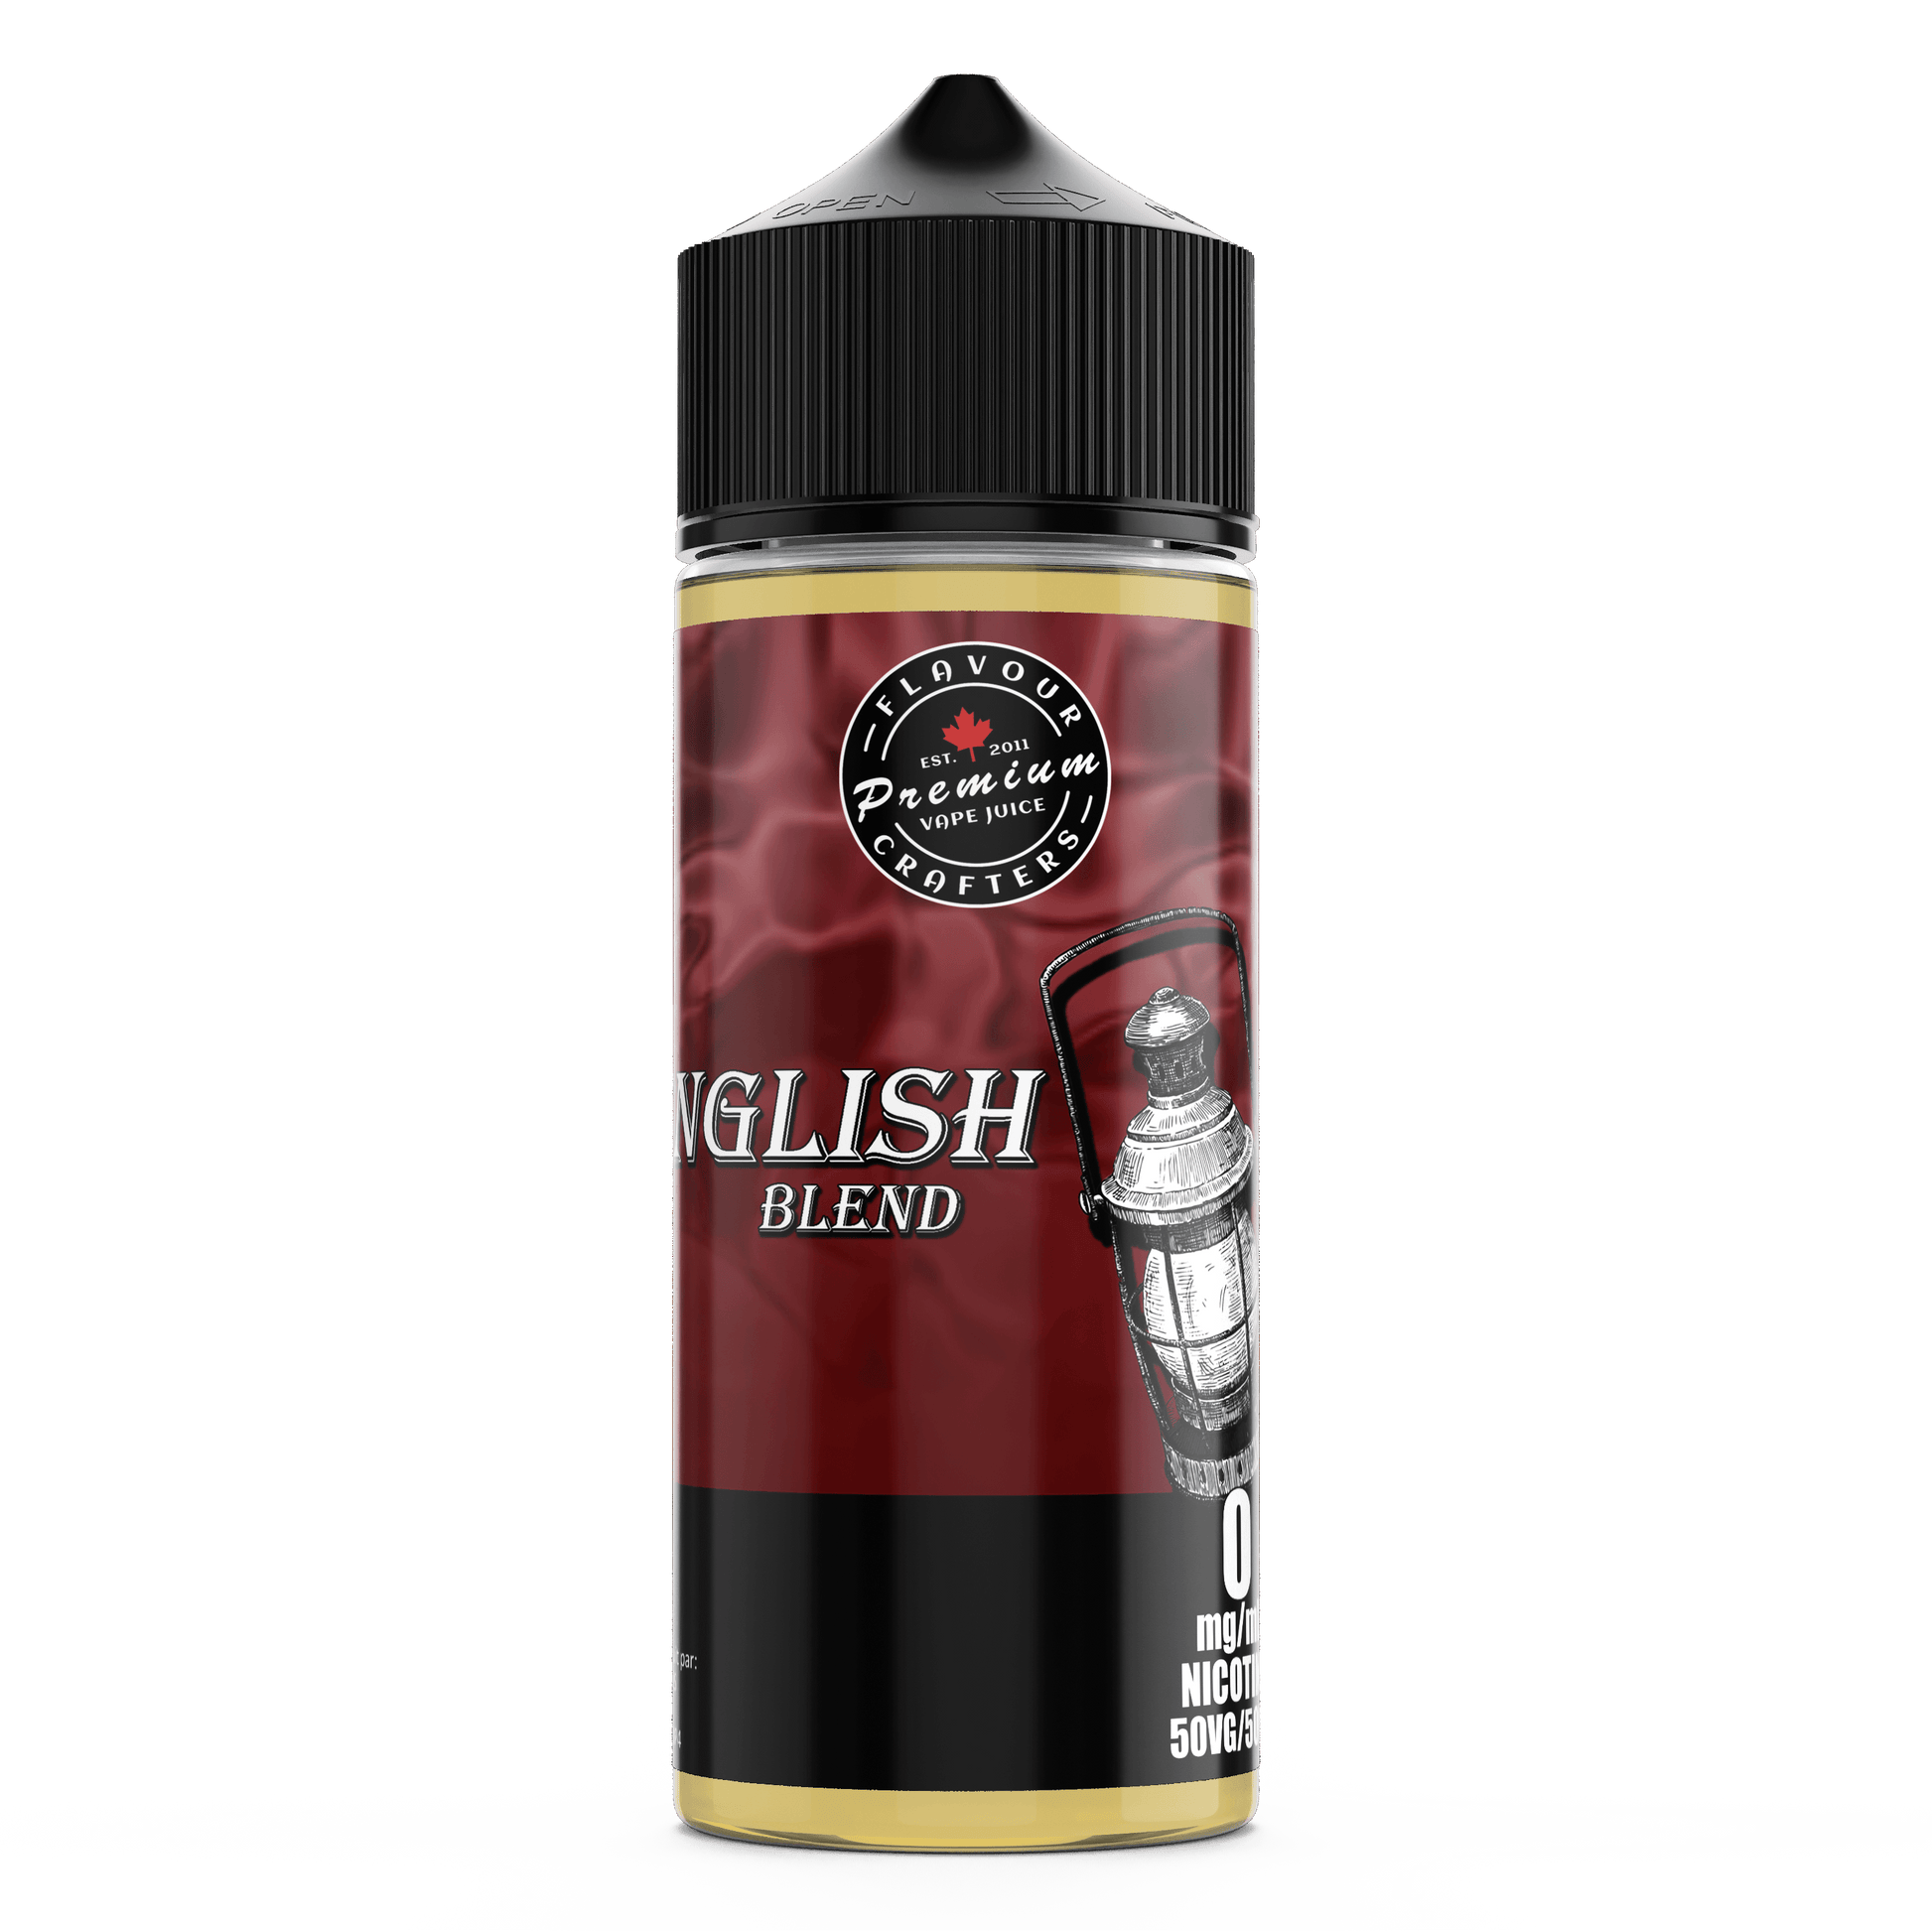 ENGLISH BLEND (DUNHULL) TOBACCO VAPE JUICE FLAVOUR CRAFTERS INC. 120mL 0mg 